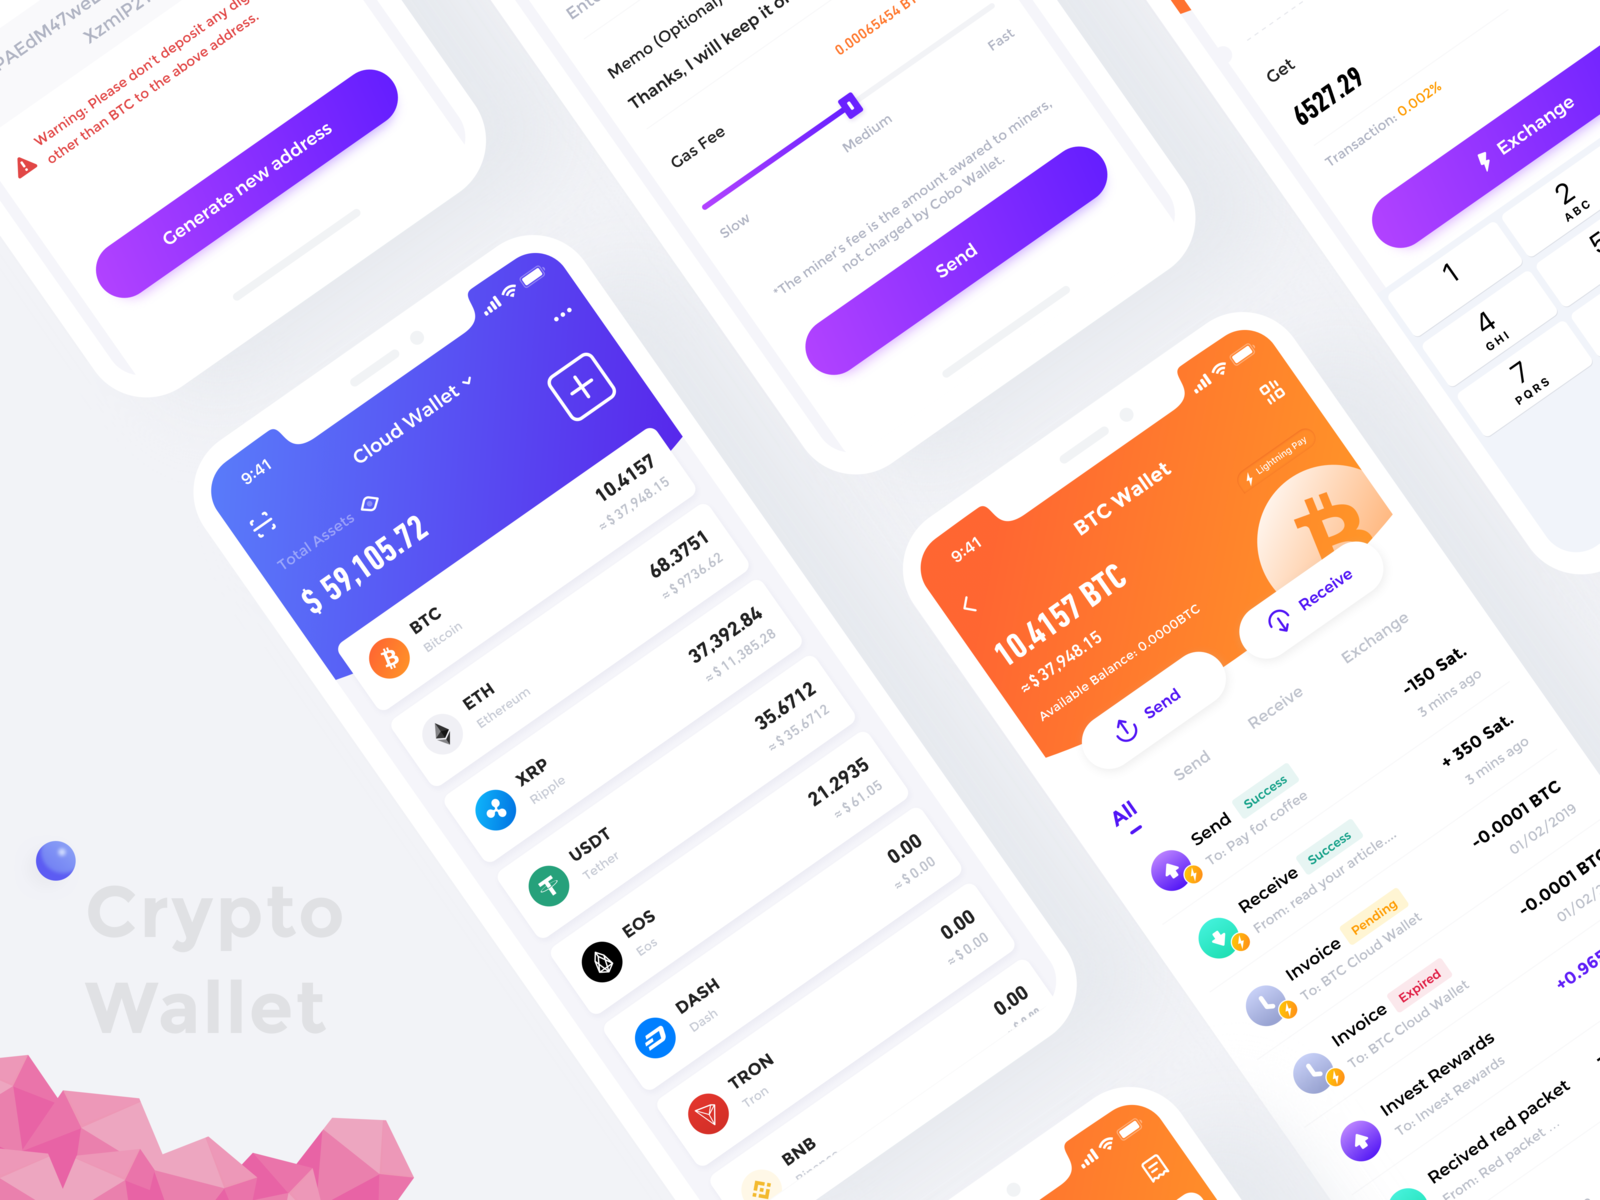 Crypto Wallet 3 by CJ__Alex for DCU on Dribbble